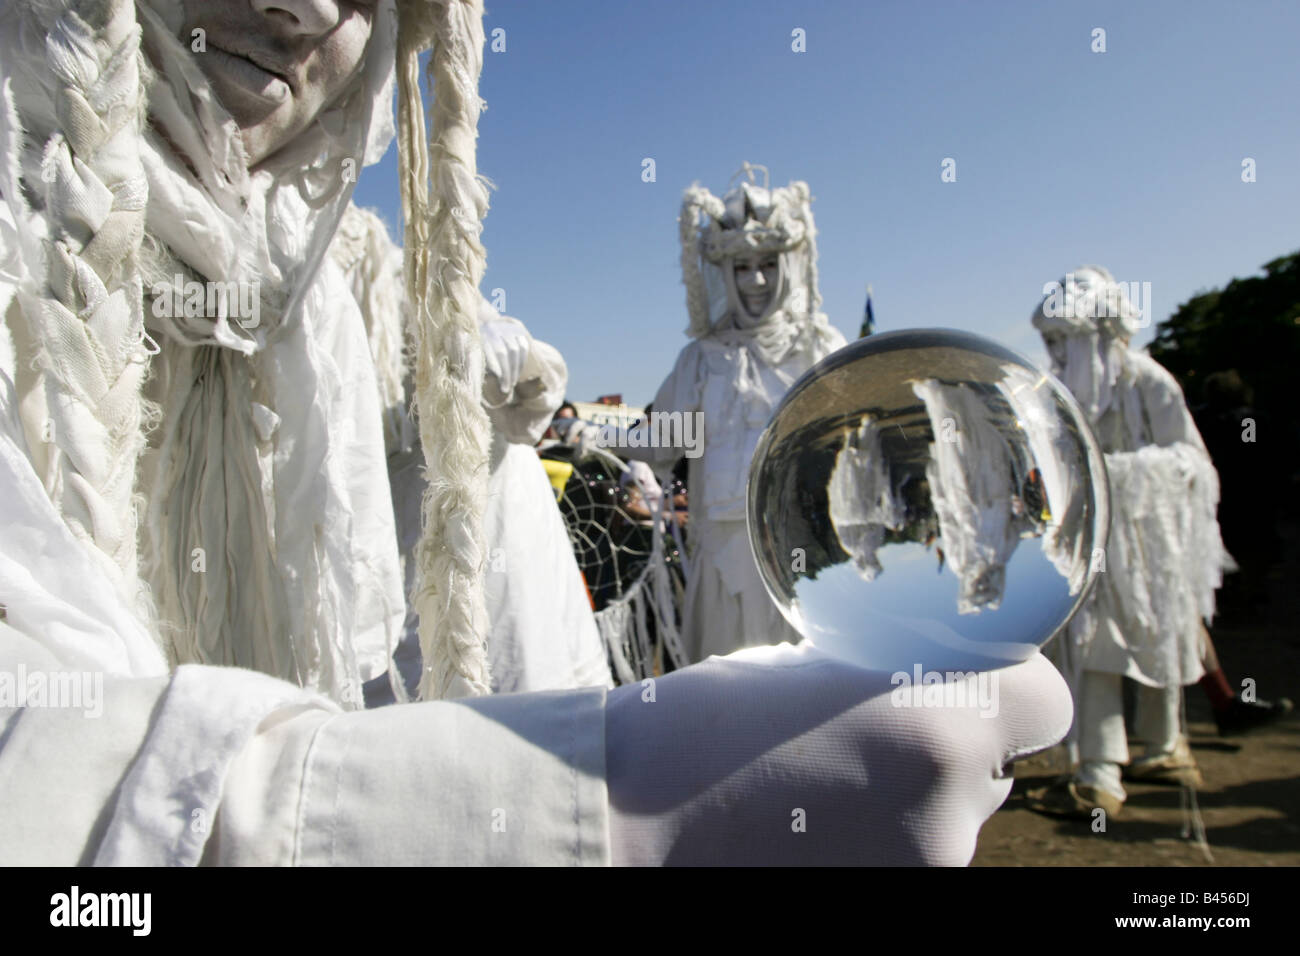 Performance artists dressed in white and holding crystal balls move through the crowds in the One World stage area Stock Photo